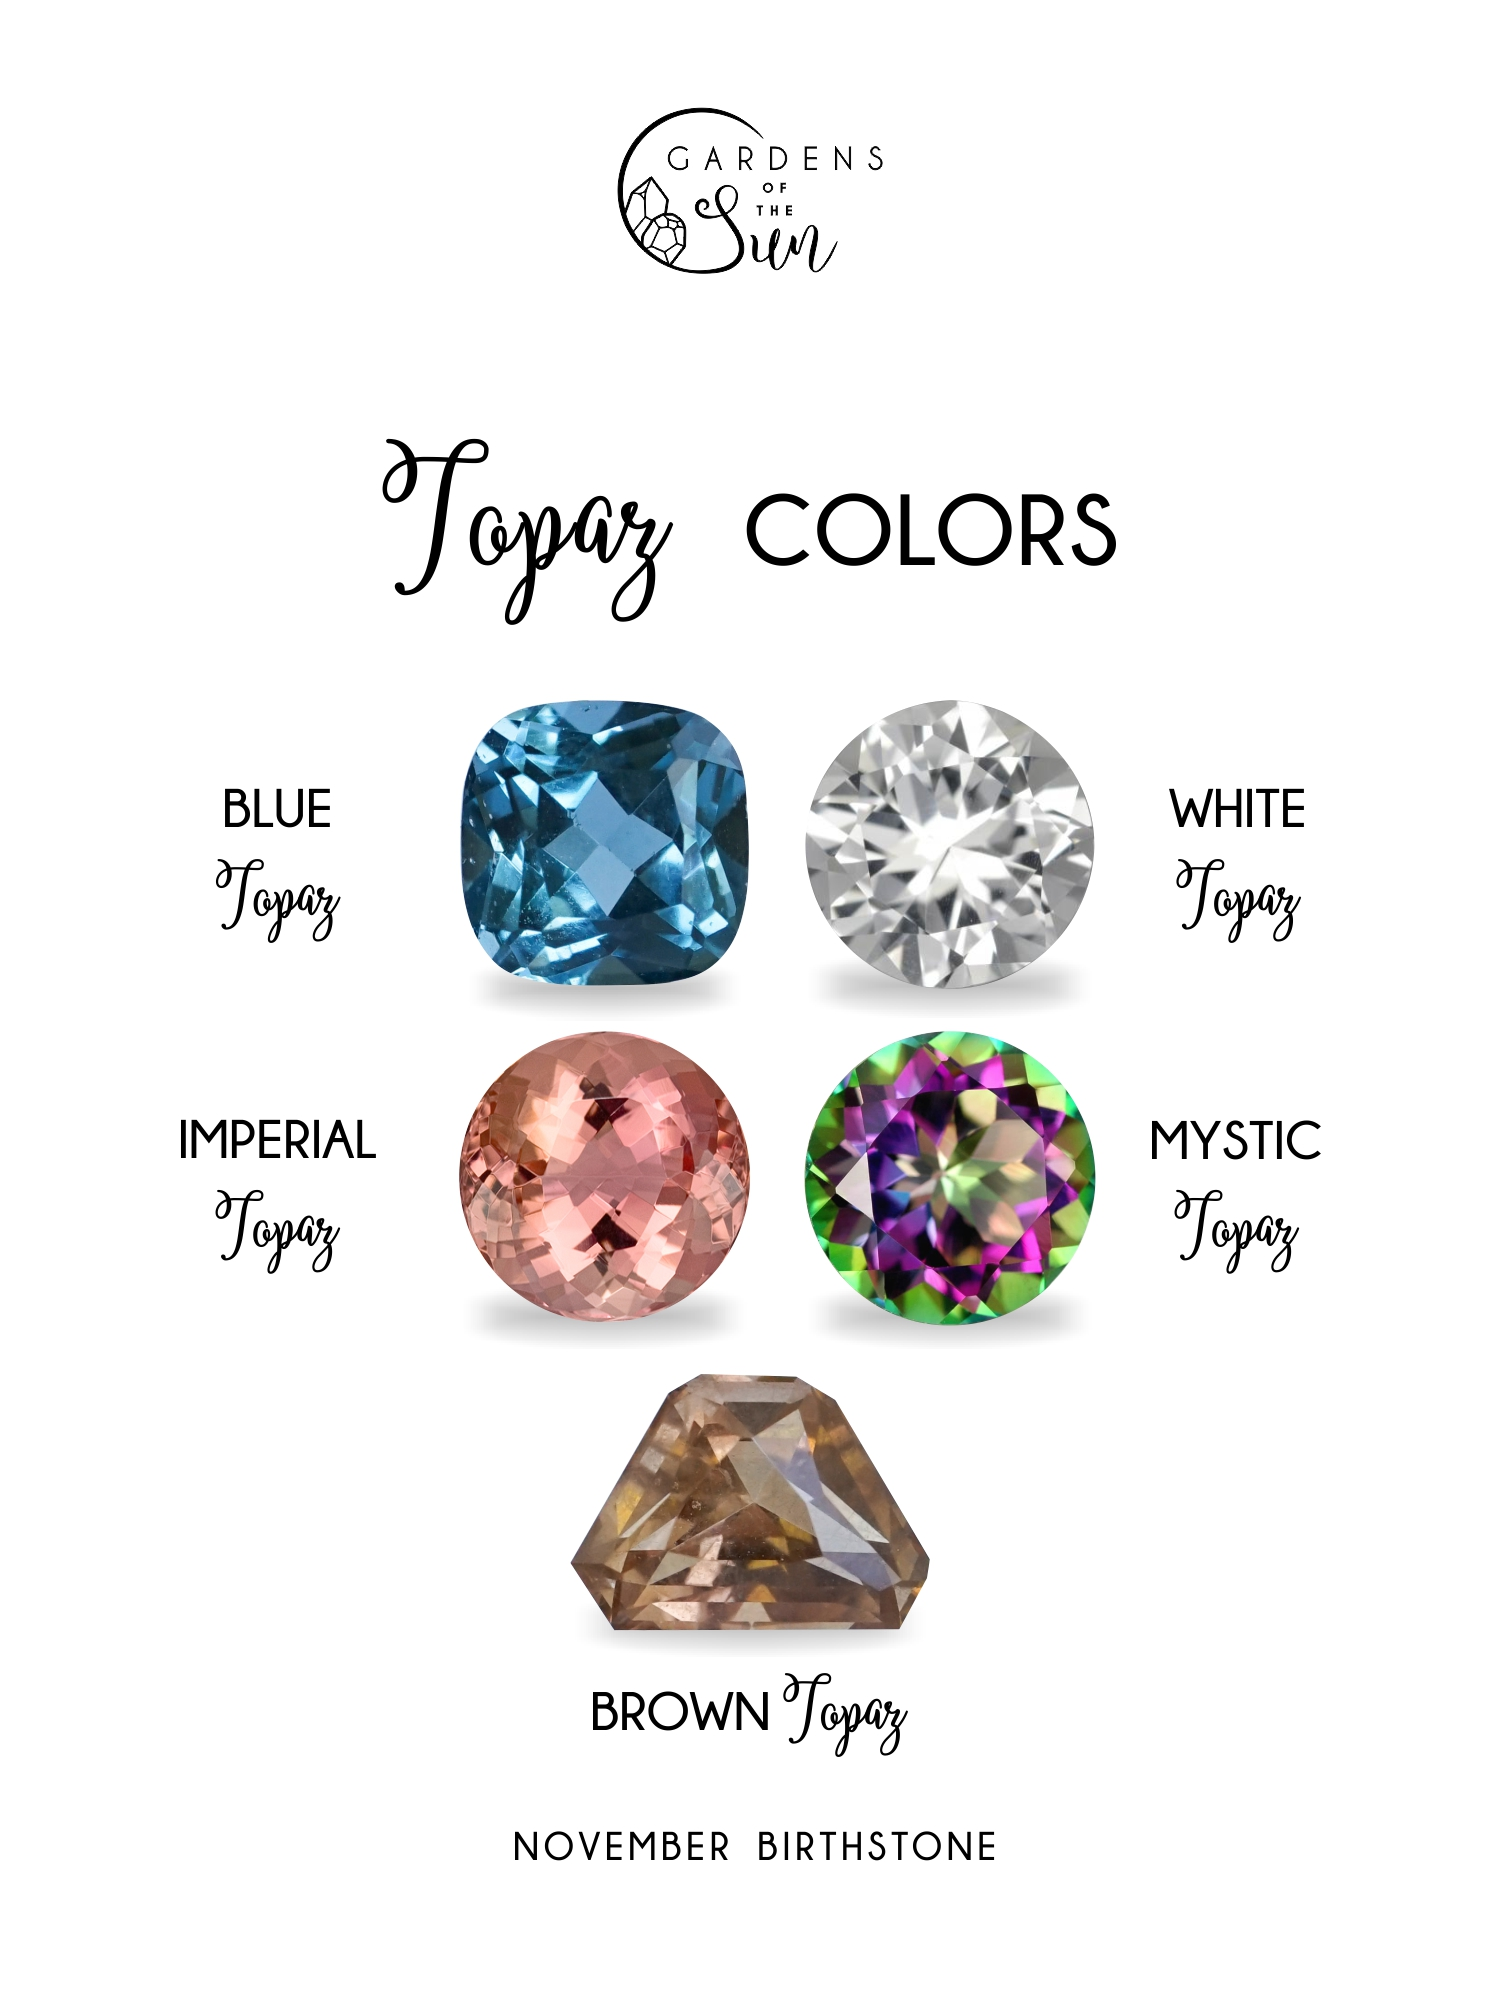 A variety of topaz colors